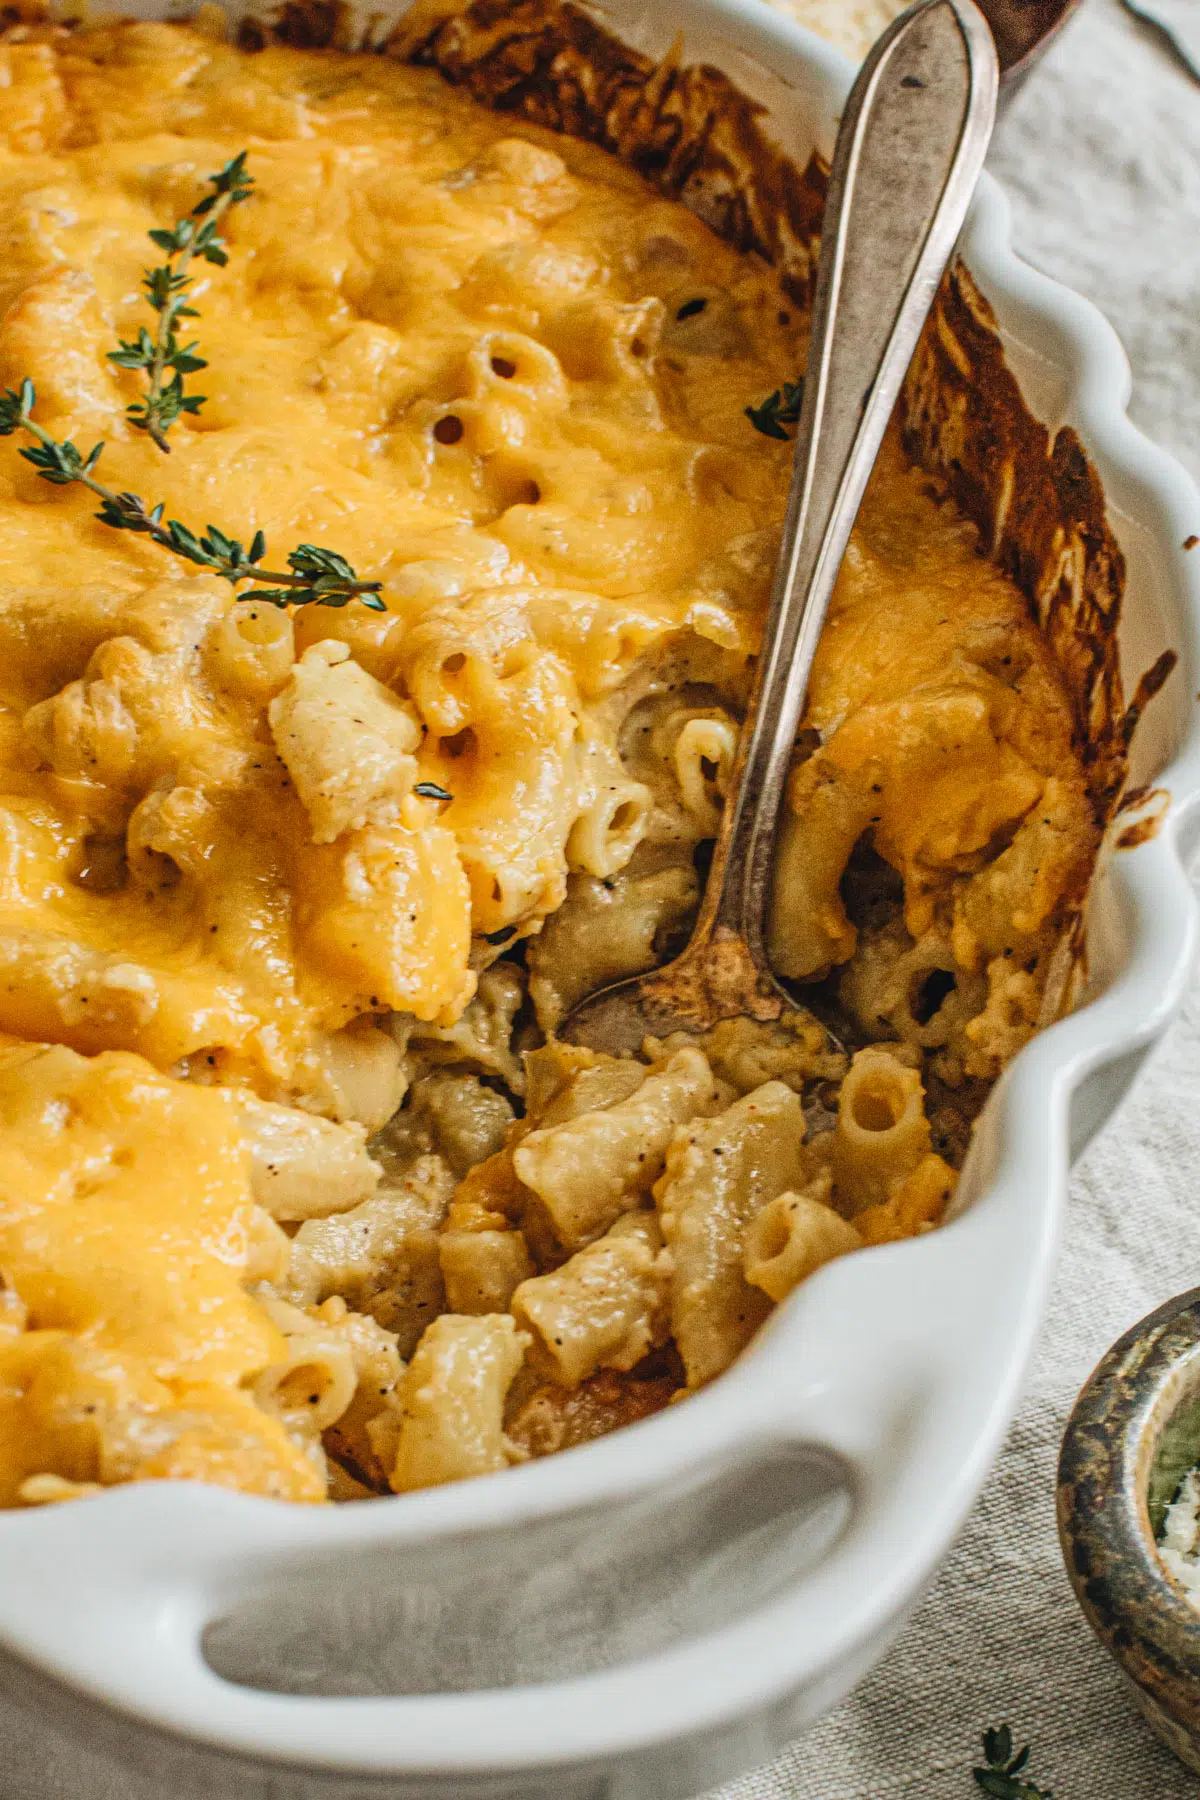 Baked mac and cheese in a white casserole dish with a silver serving spoon.